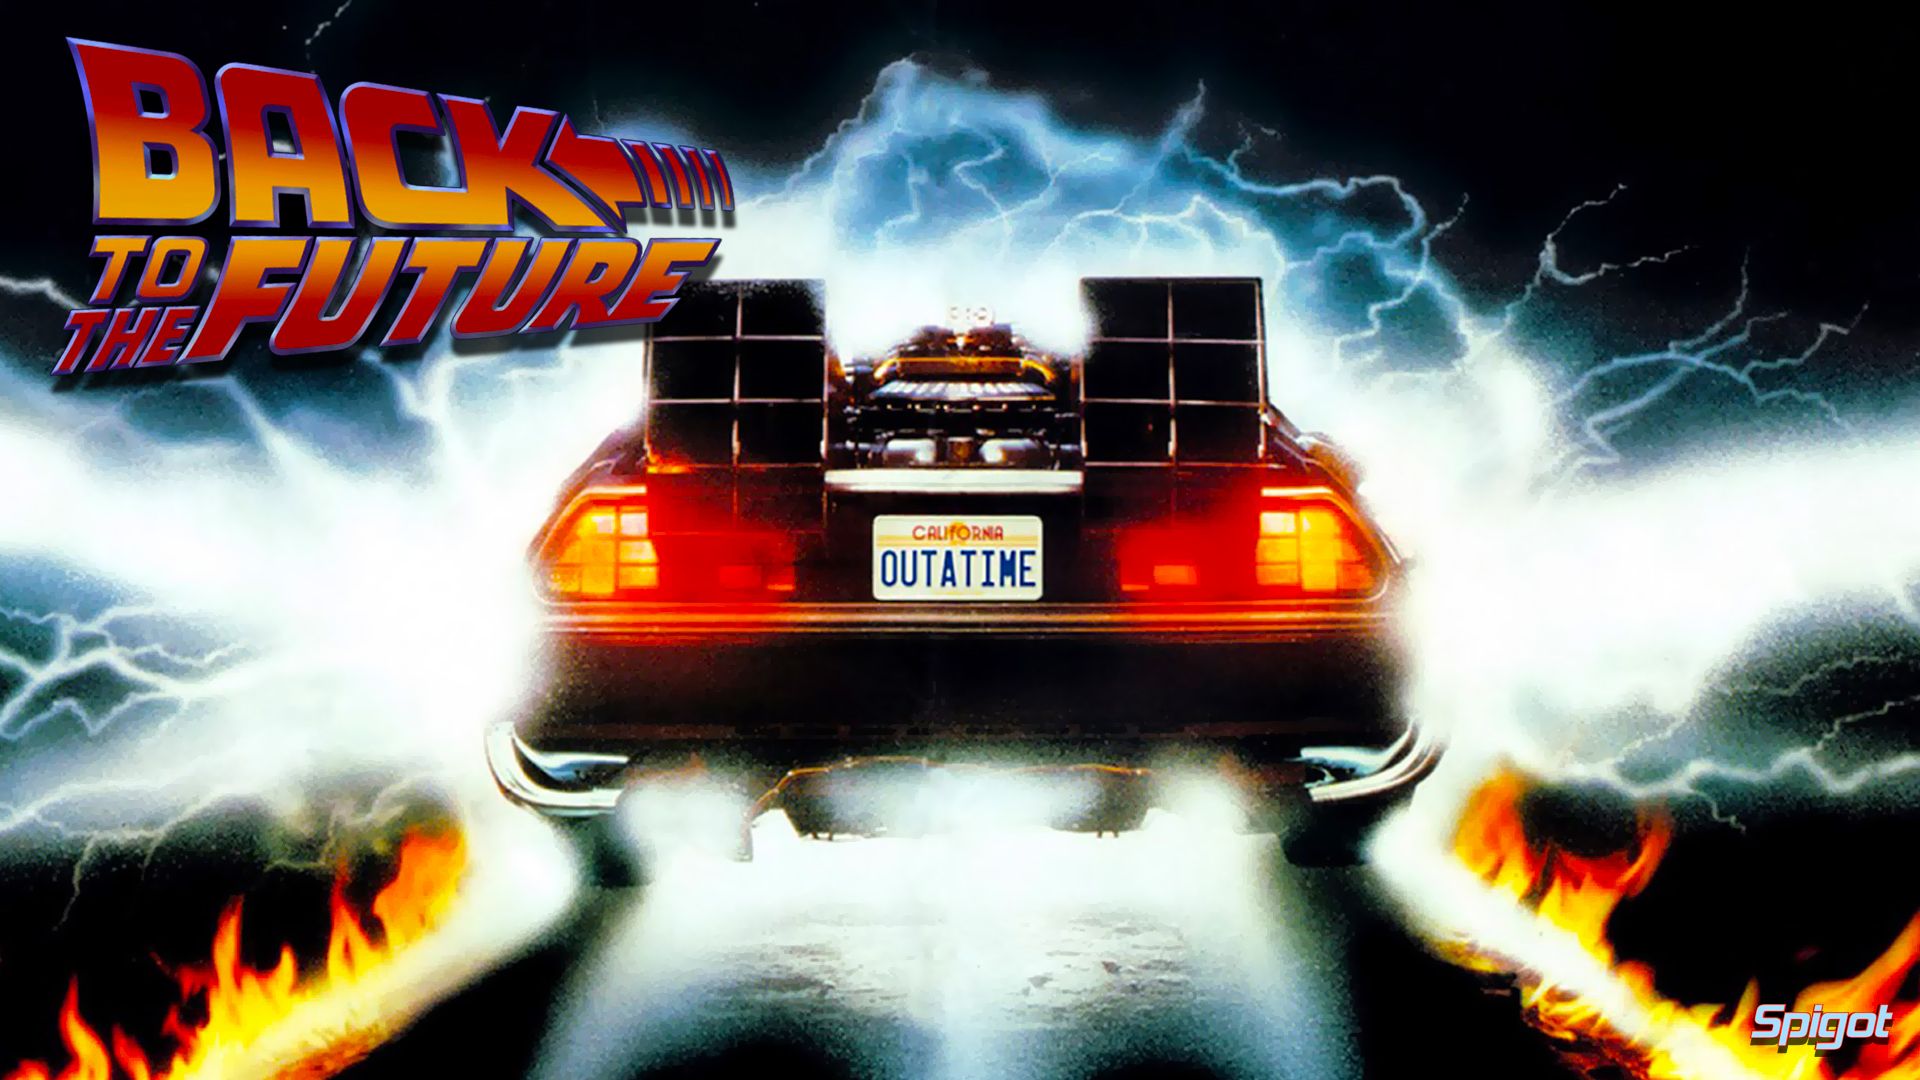 Back To The Future HD Wallpaper for desktop download